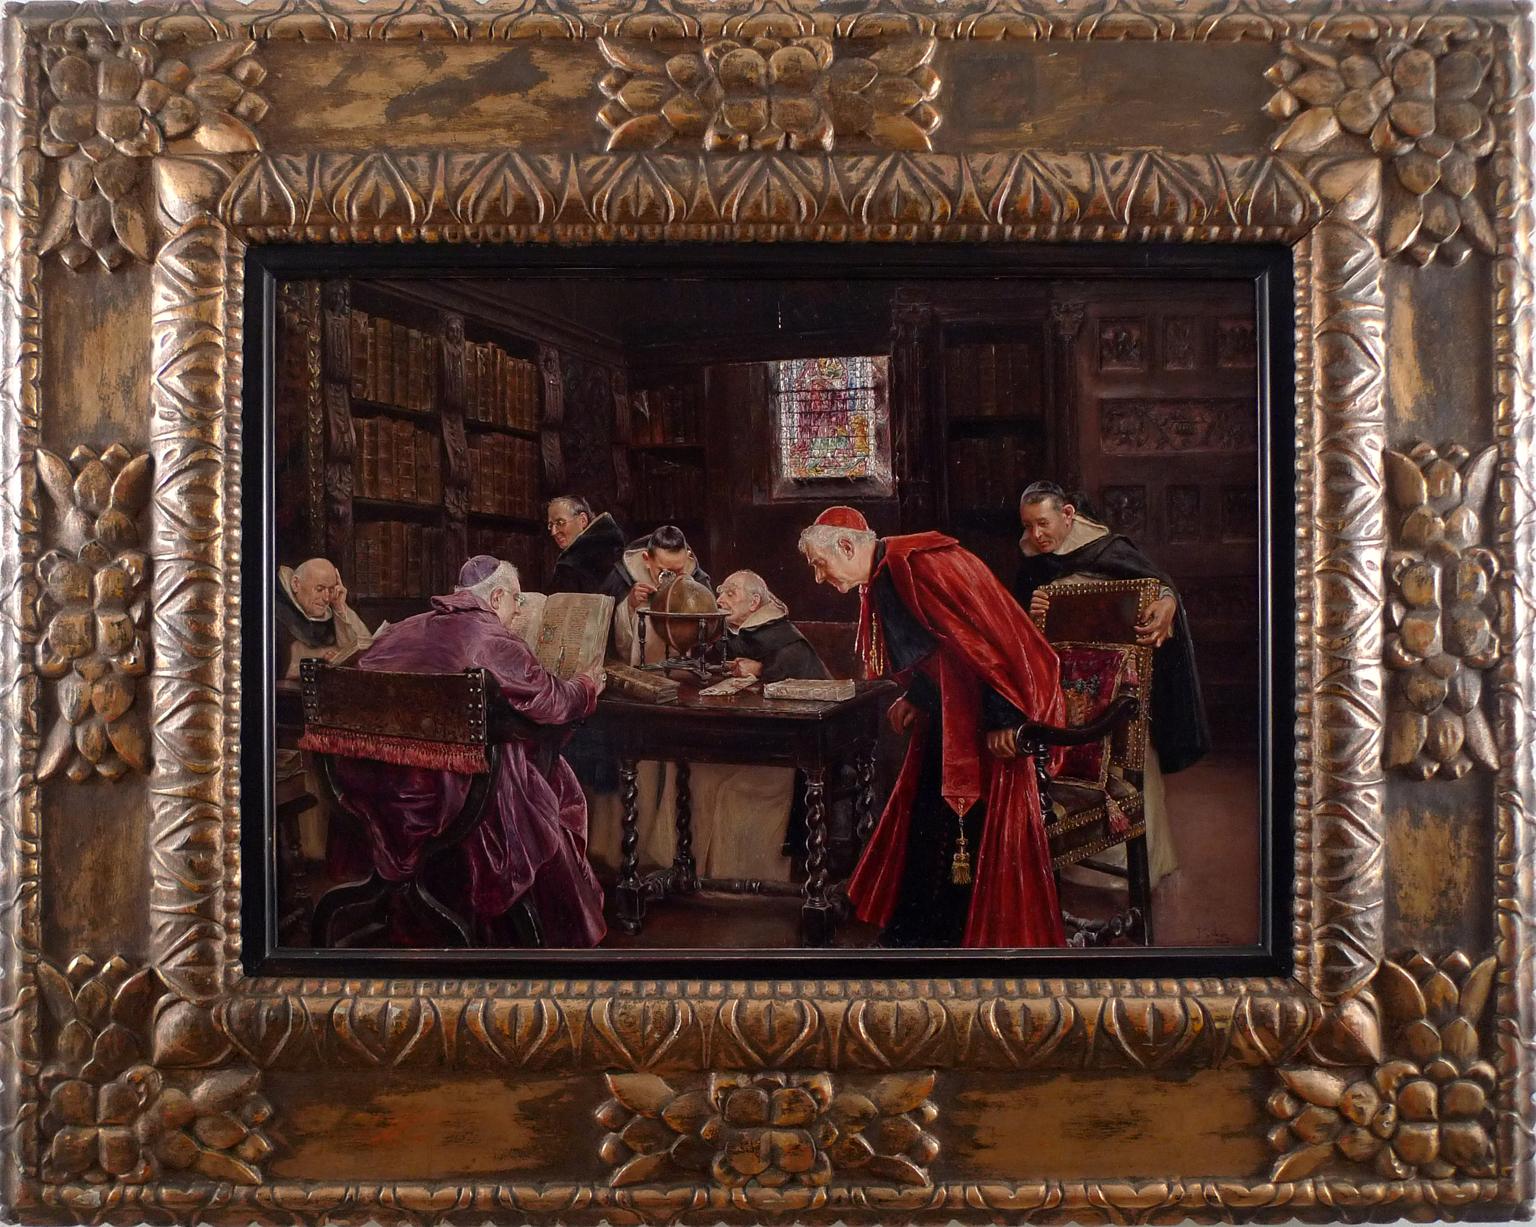 José Gallegos y Arnosa Figurative Painting - "Clerics in the Library", 19th Century Oil on Wood Panel by José Gallegos Arnosa